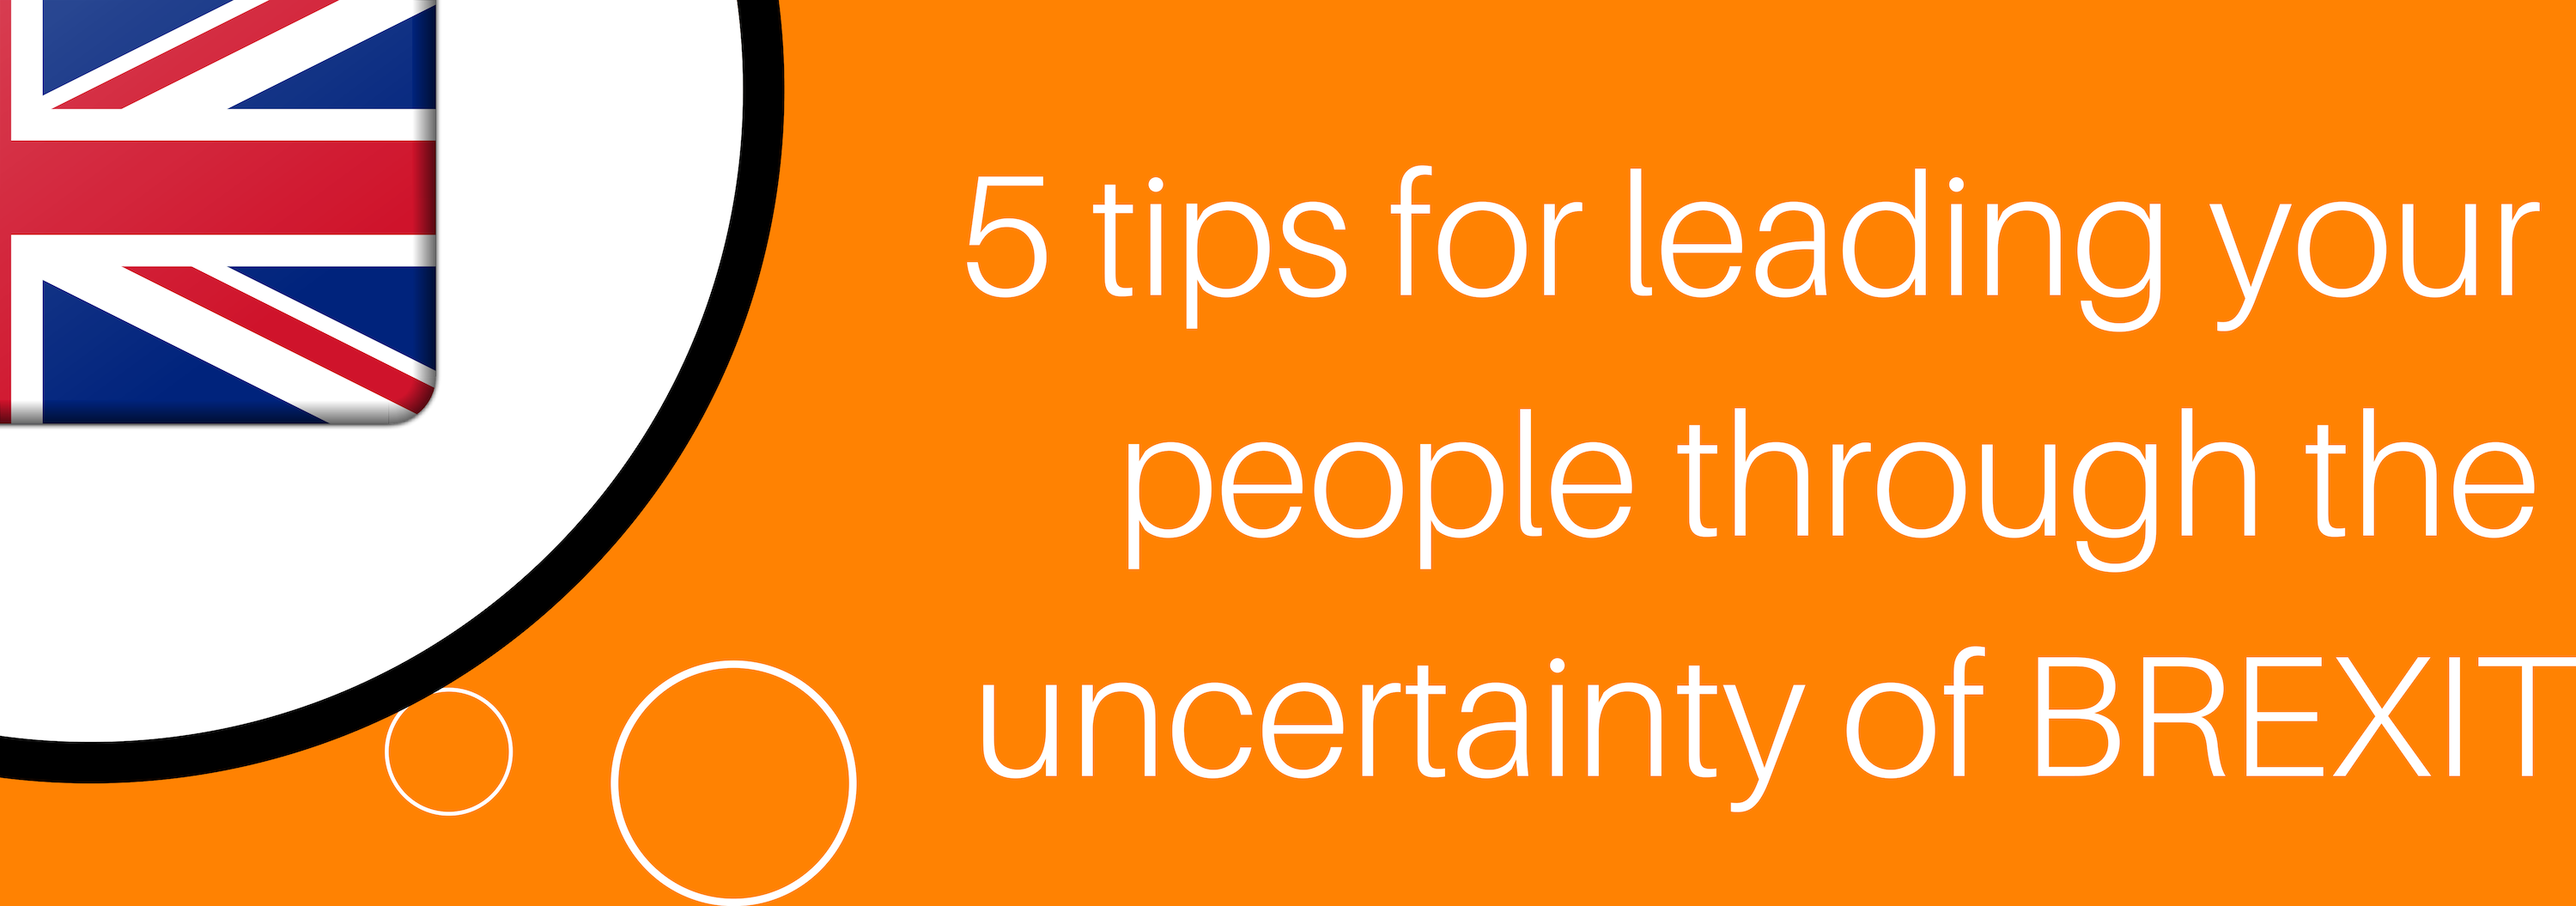 5 tips for leading your people through the uncertainty of BREXIT